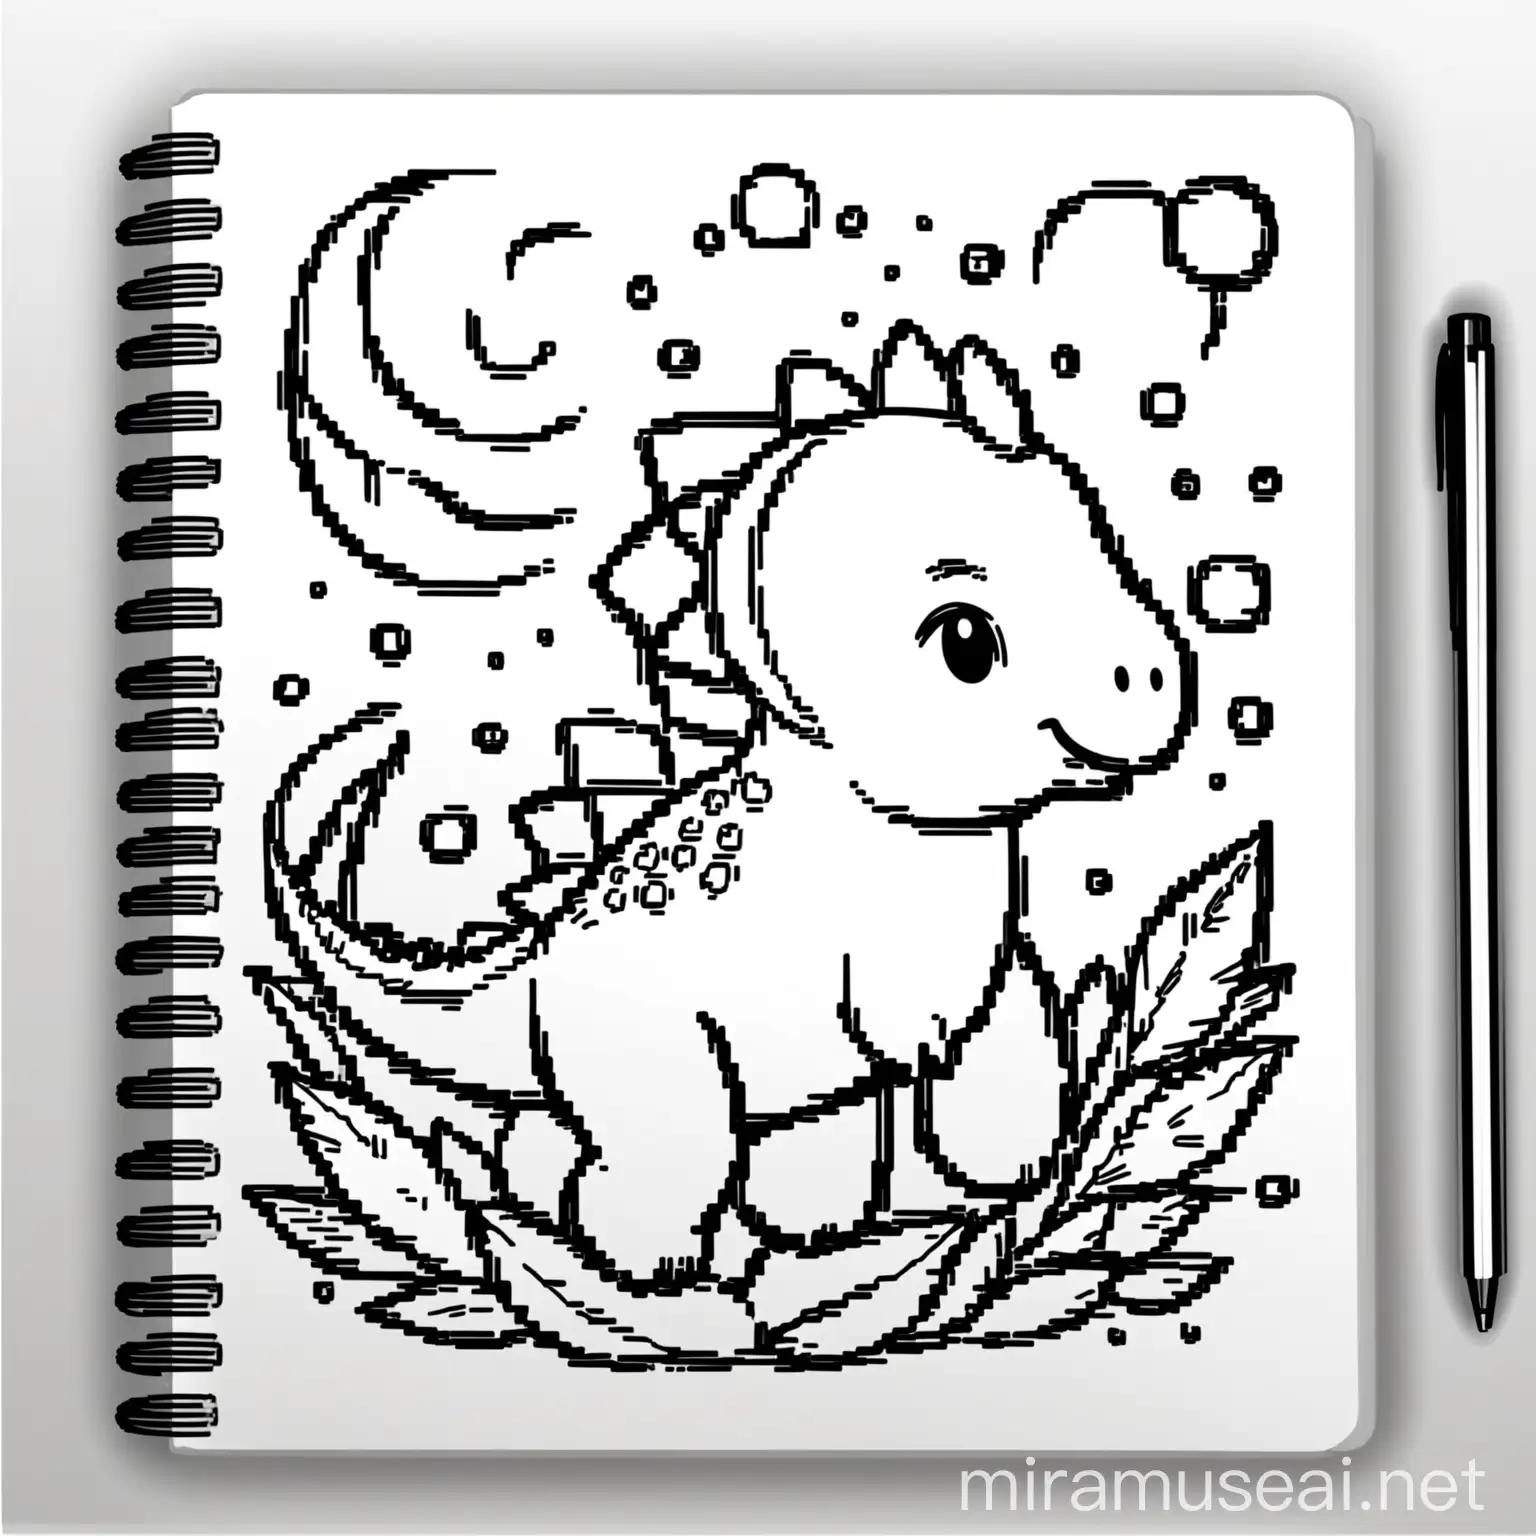 Adorable Baby Dinosaur Coloring Book Illustration in Black and White